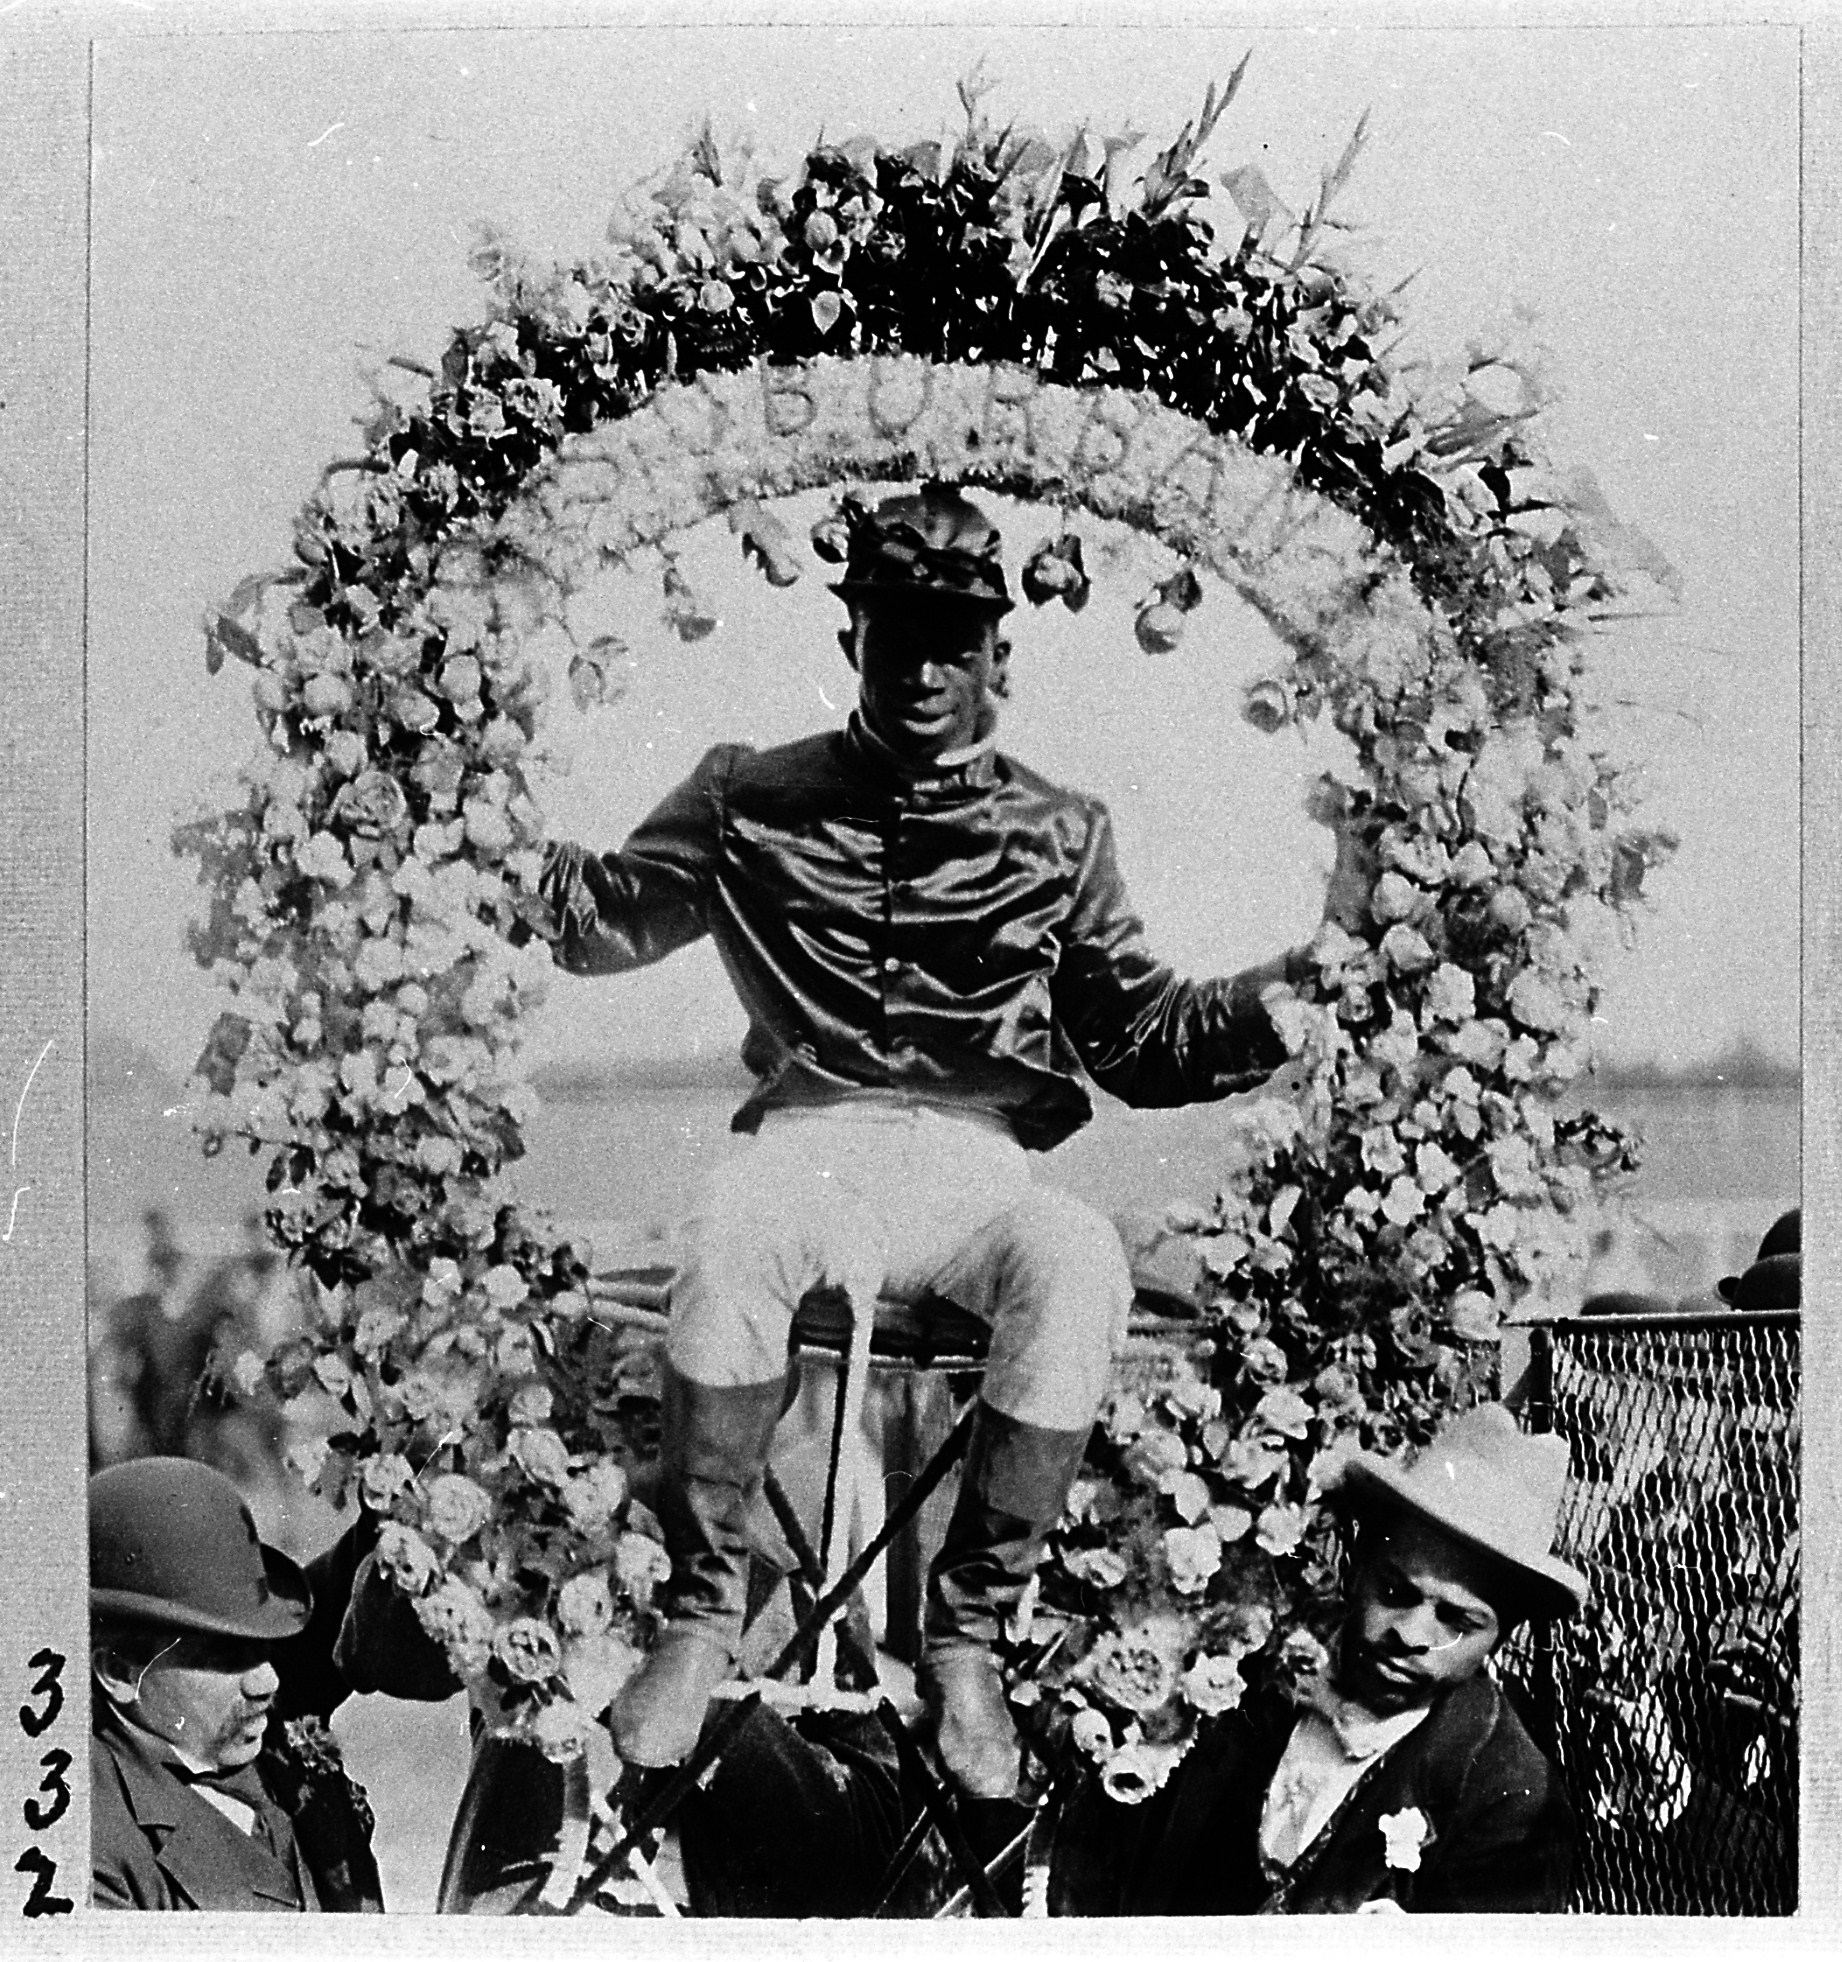 Anthony Hamilton after winning the 1895 Suburban (Keeneland Library Hemment Collection)